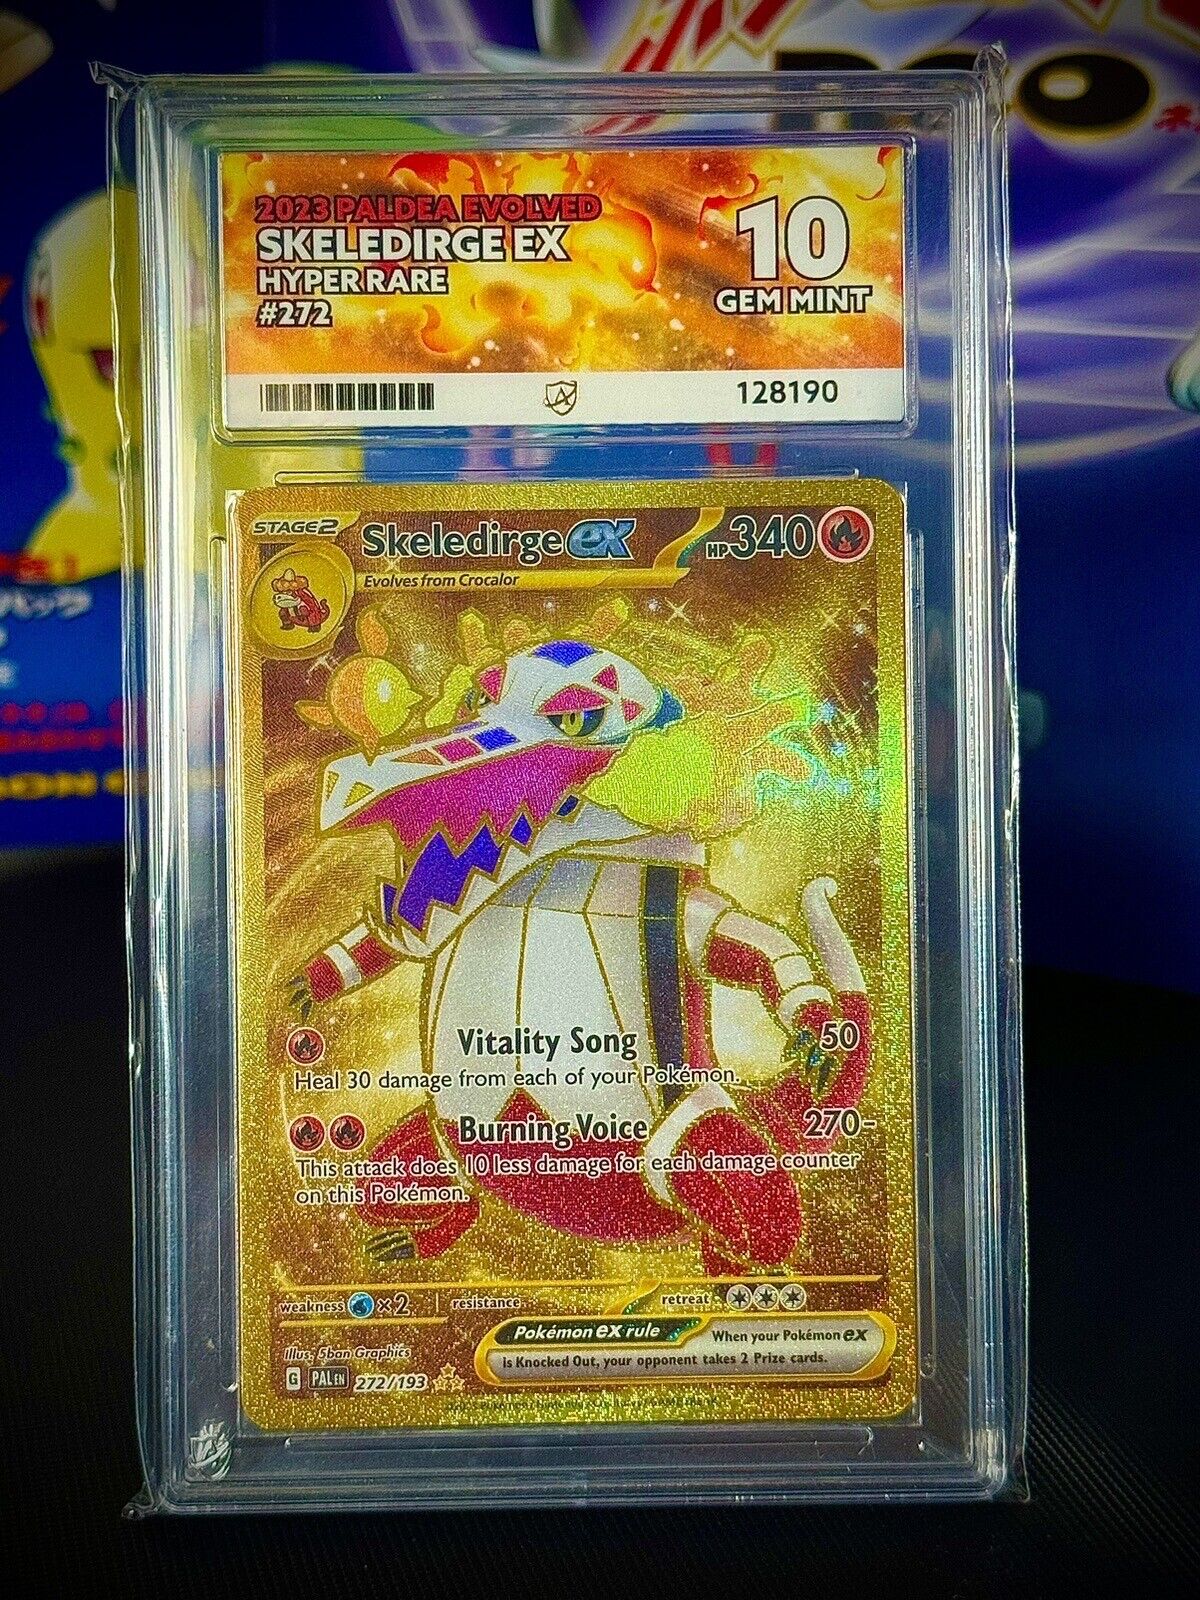 Ace 10 Skeledirge ex - Gold hyper rare with ace label